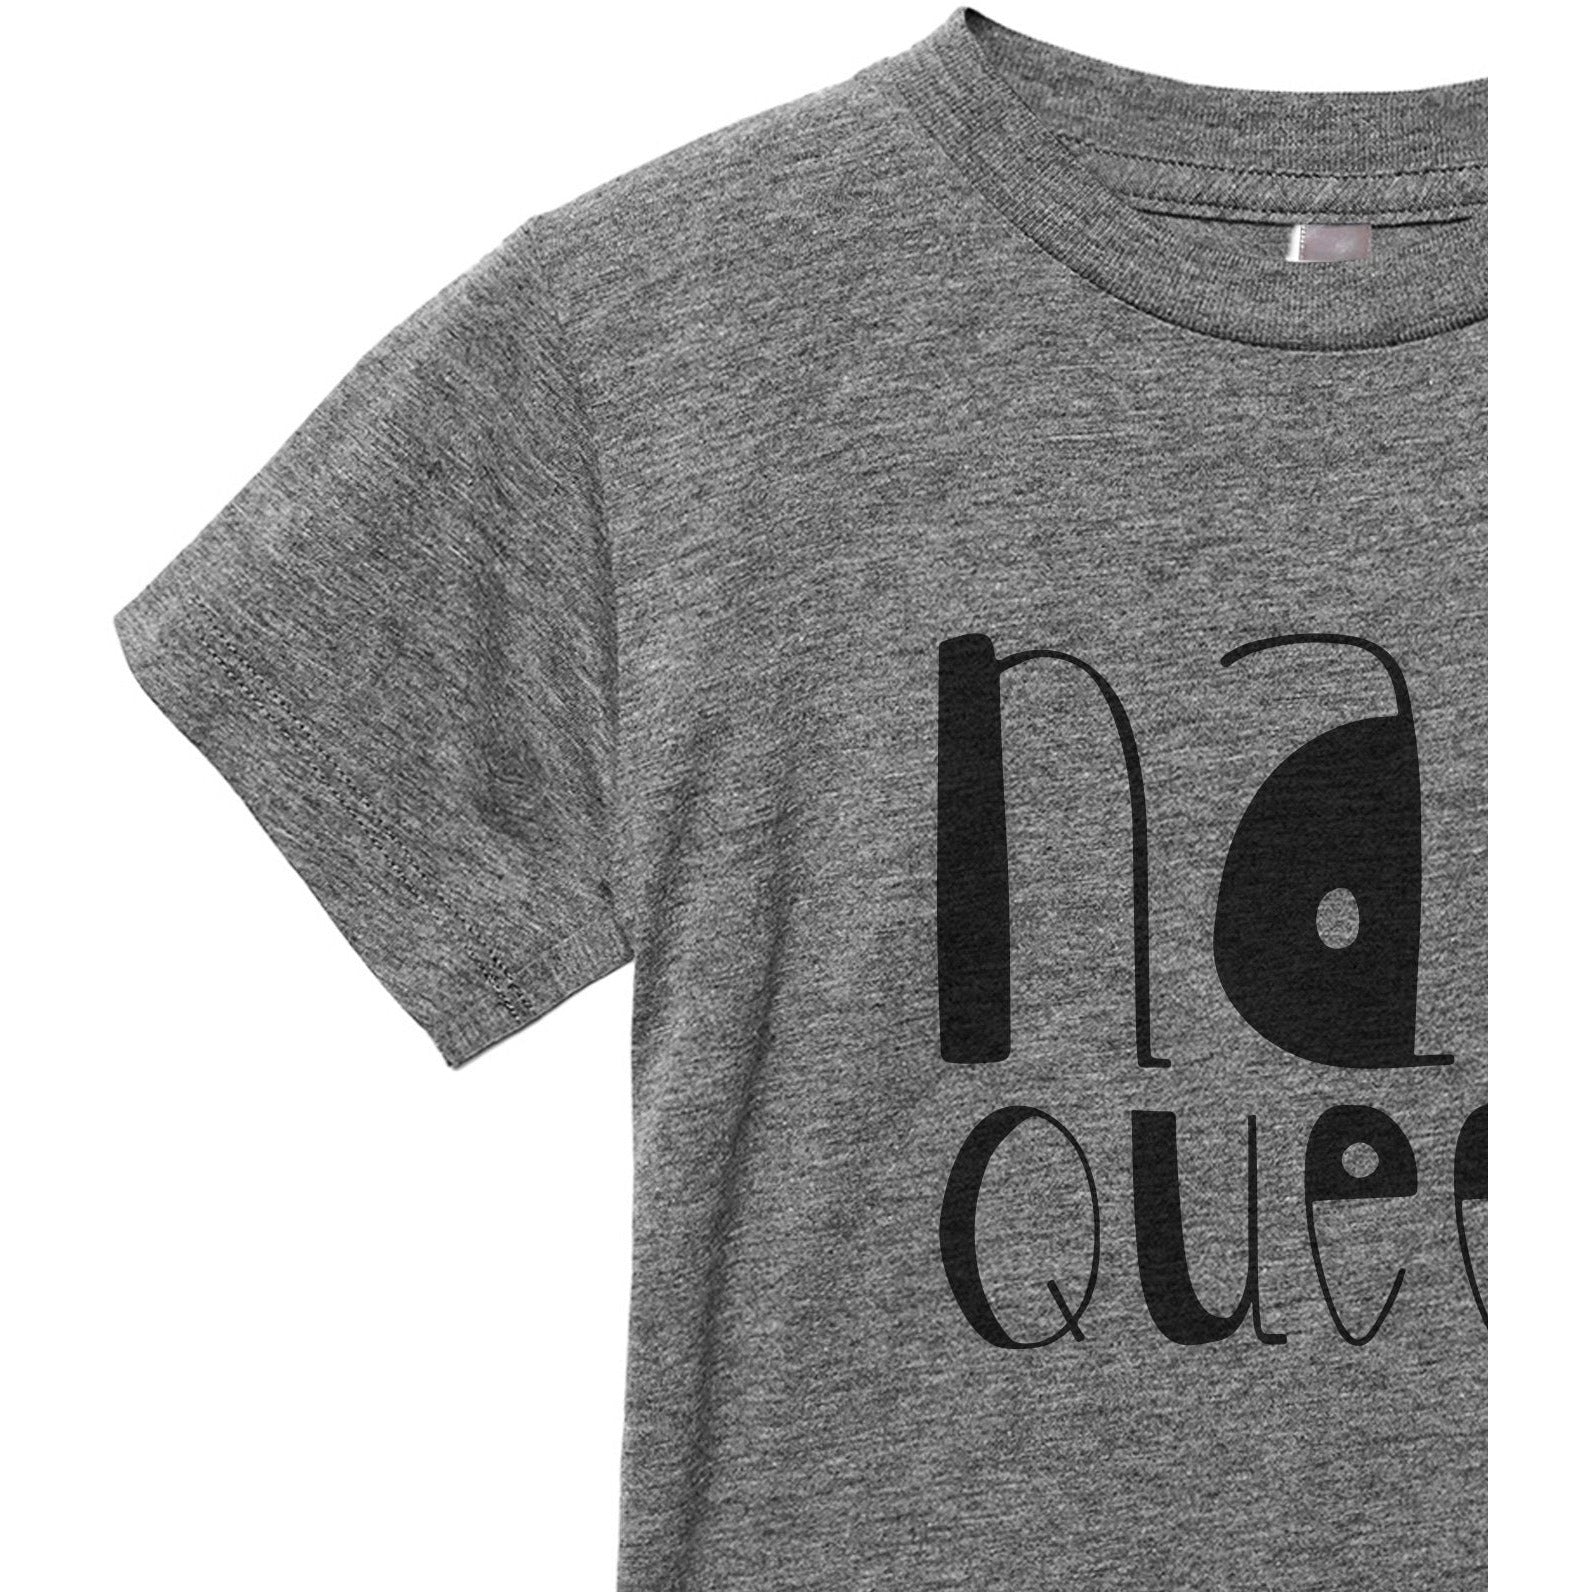 Nap Queen Toddler's Go-To Crewneck Tee Charcoal Close Up Sleeves Collar Details
